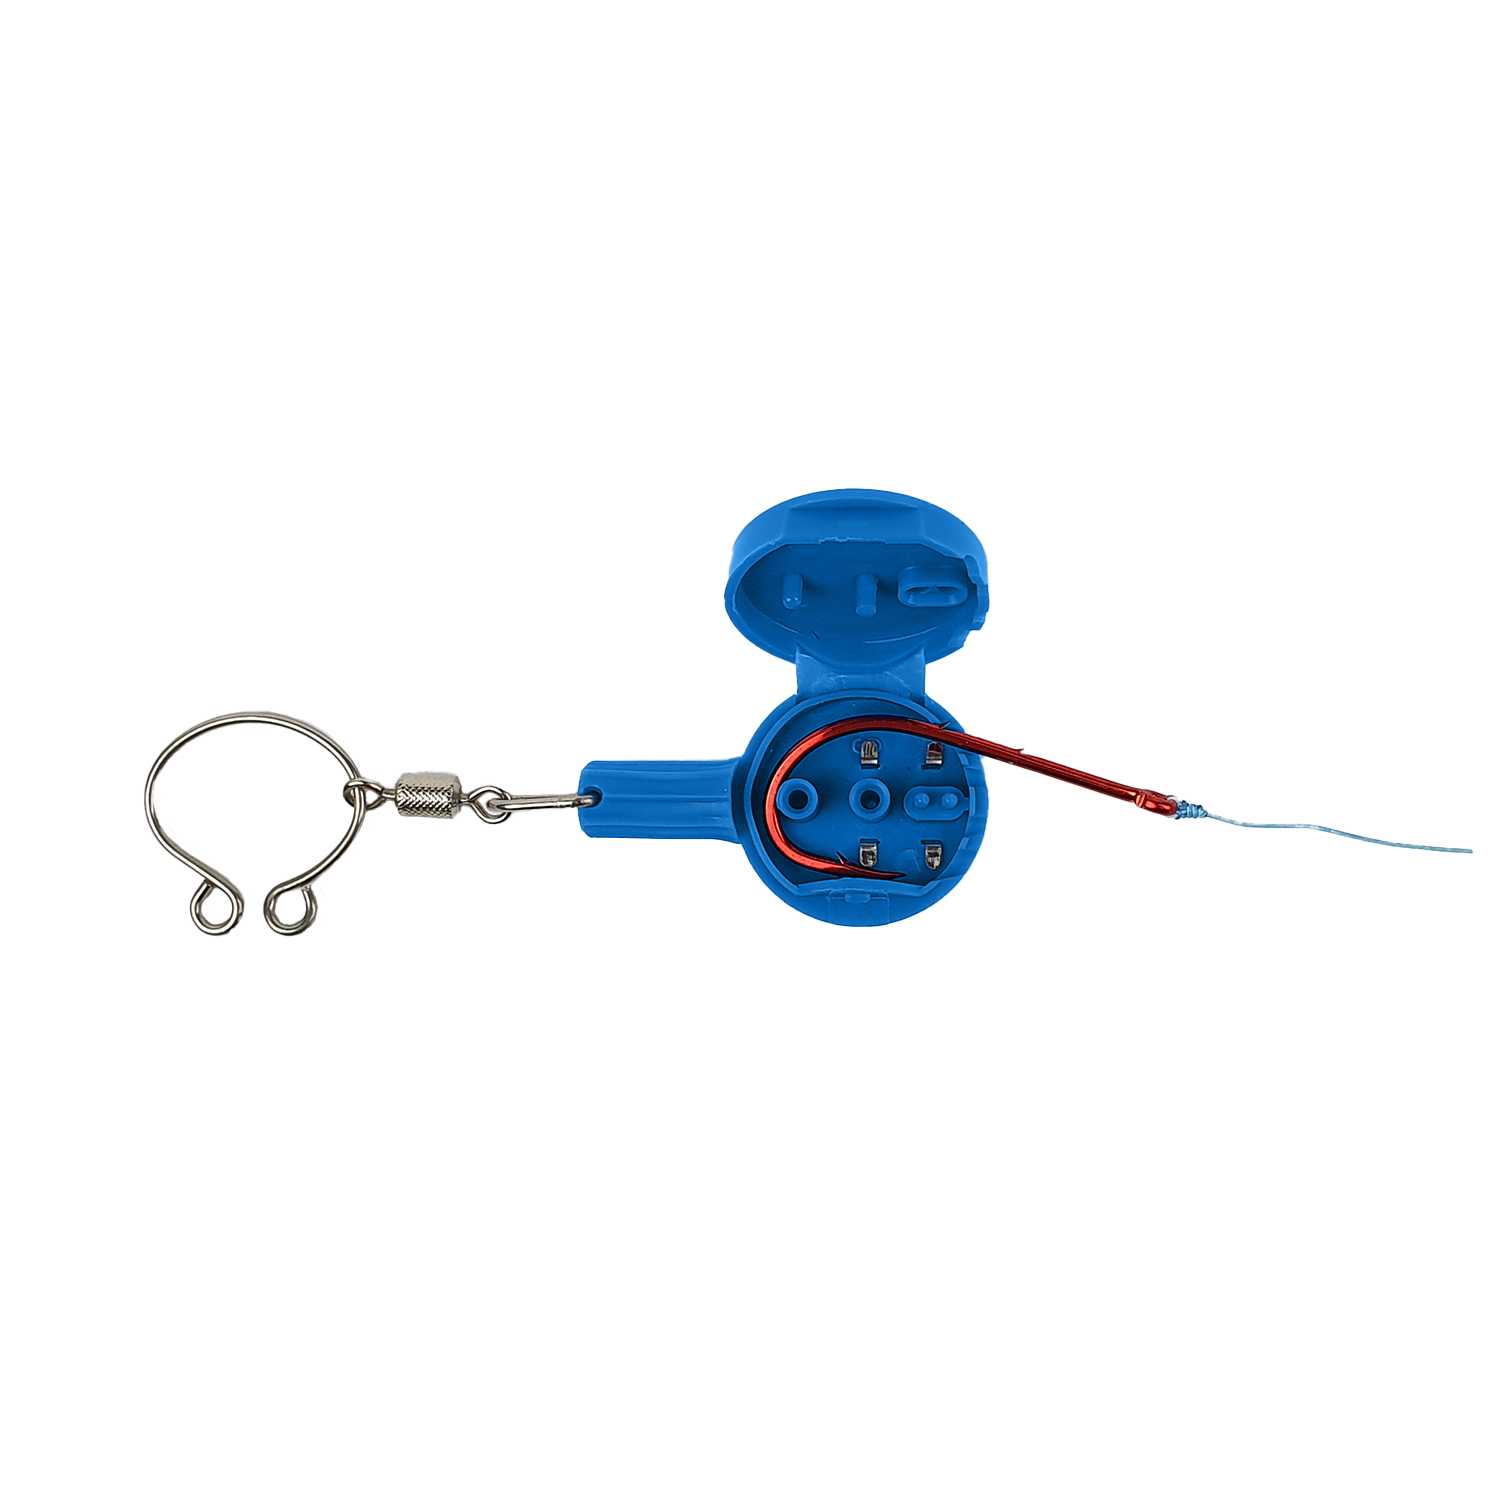 How to tie a Snell Knot using the Hook-Eze knot tying tool #snellknot  #fishingknots #hookeze 